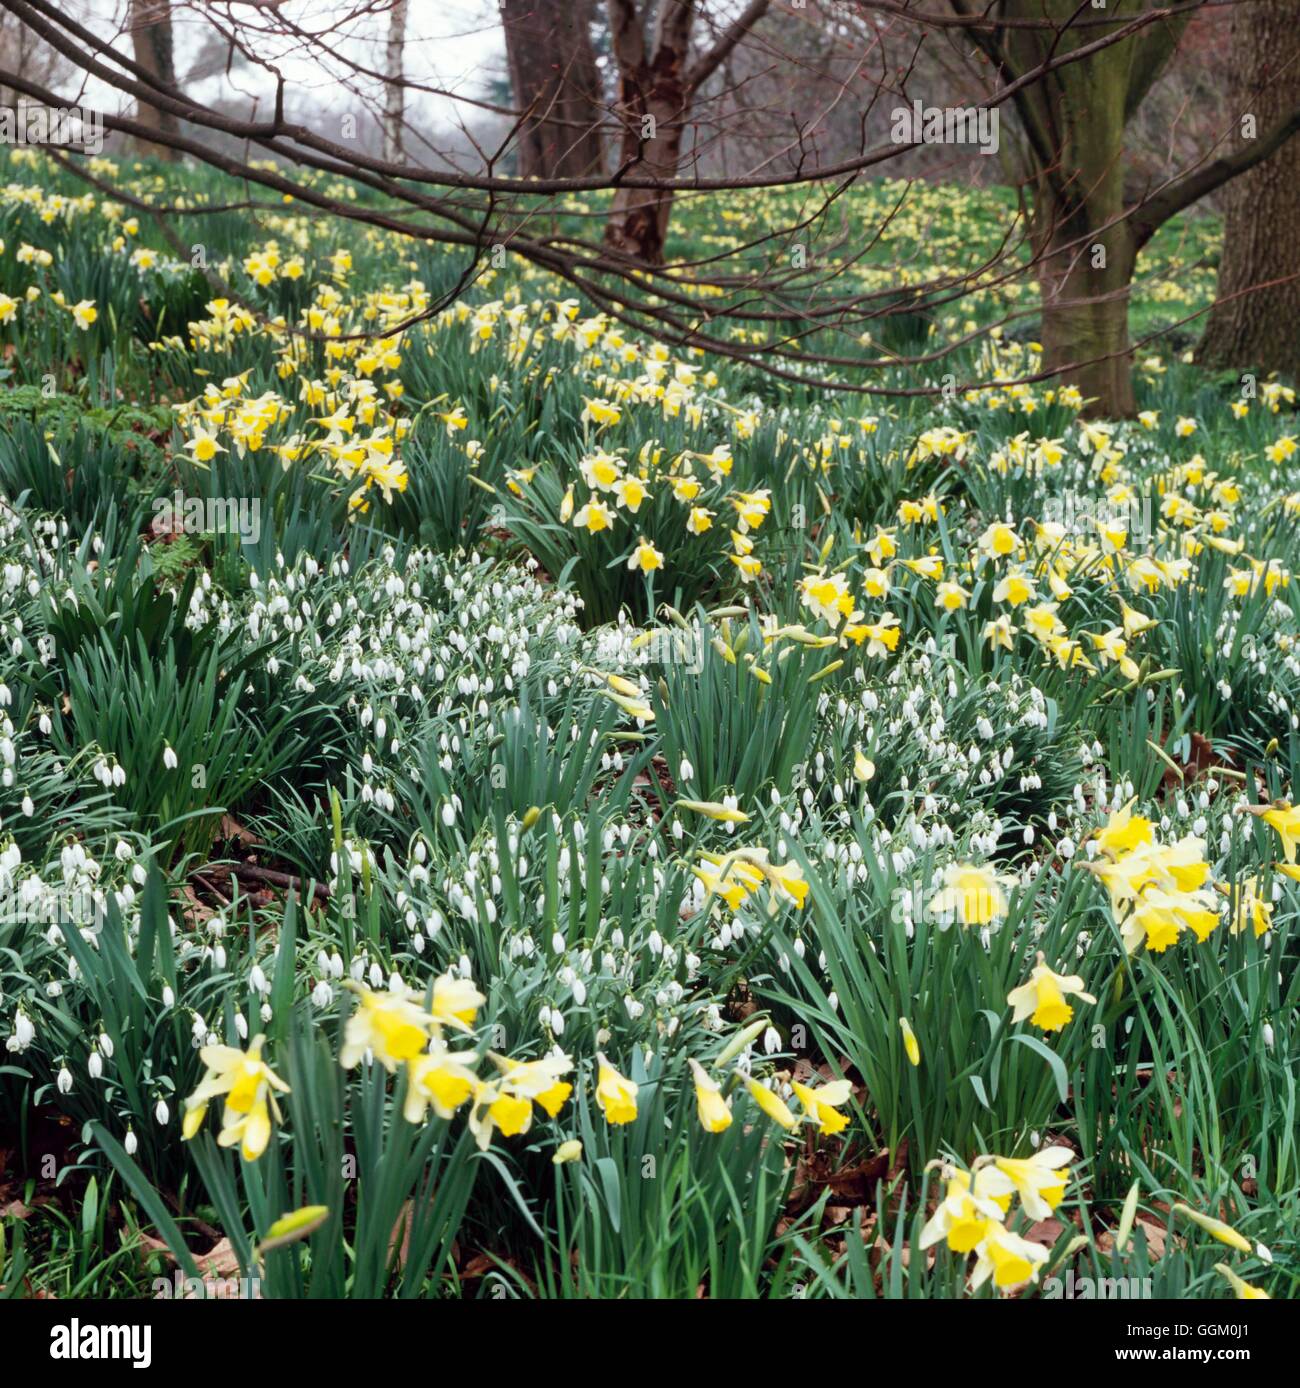 Naturalised Bulbs- - Snowdrops and Daffodils (Galanthus and Narcissus)- - (Please credit: Photos Hort/RBG Kew)   NAB10 Stock Photo